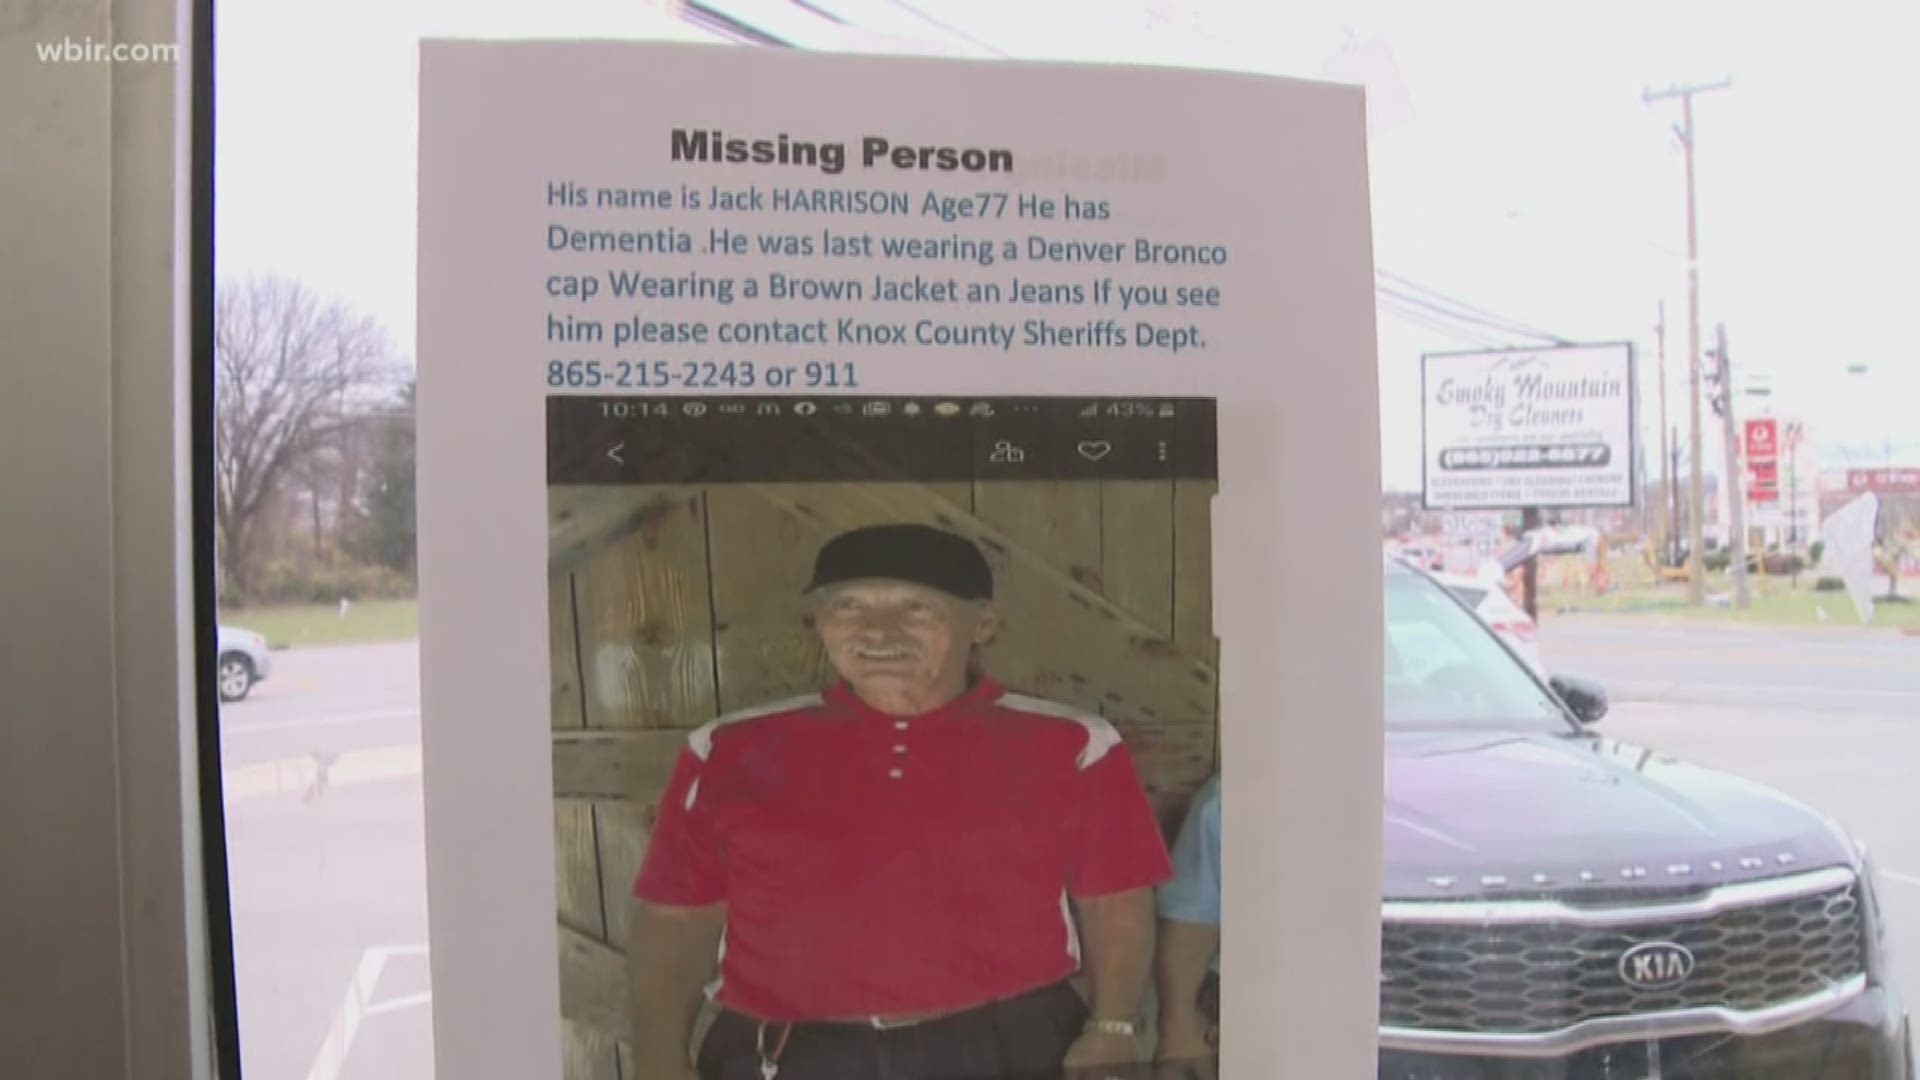 Local law enforcement can issue a silver alert when a senior is missing and family has searched the nearby area.